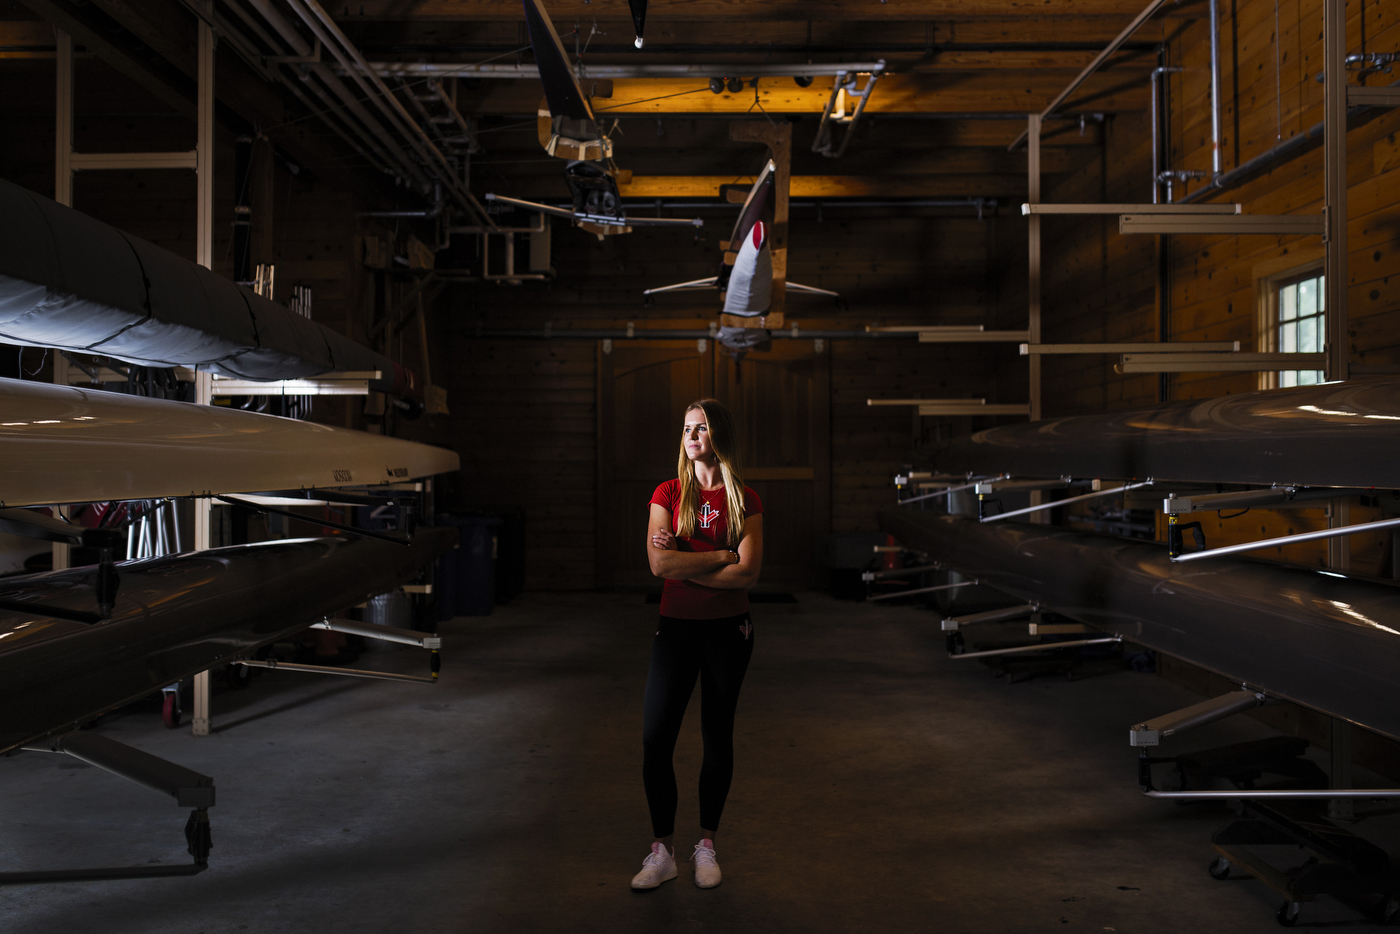 Northeastern student wins silver at World Rowing Championships